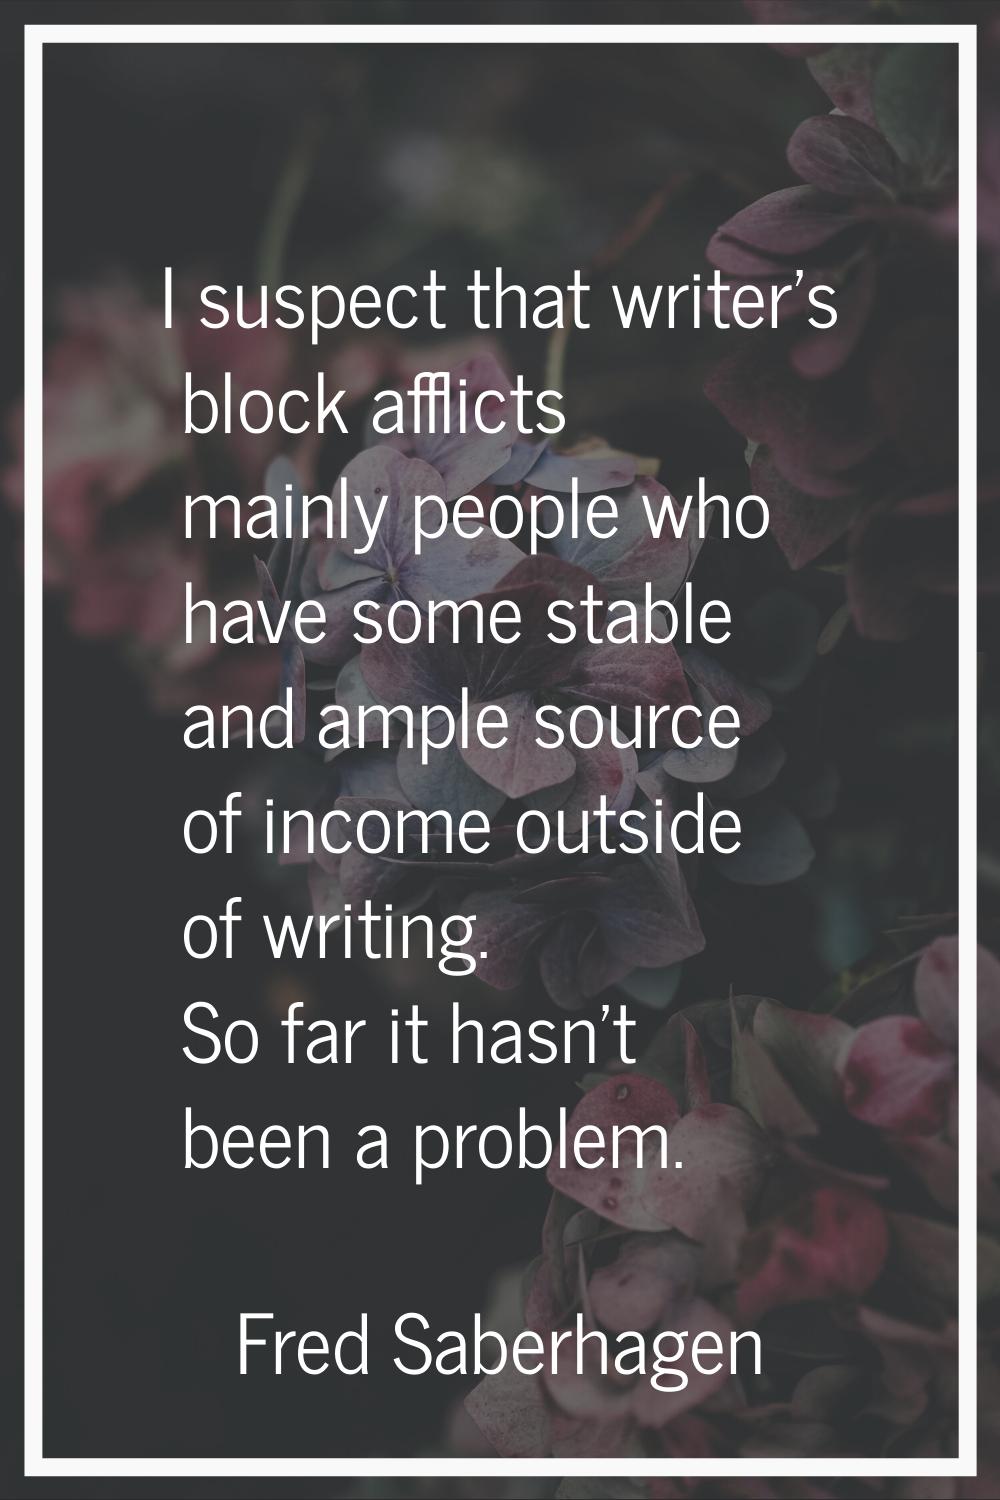 I suspect that writer's block afflicts mainly people who have some stable and ample source of incom